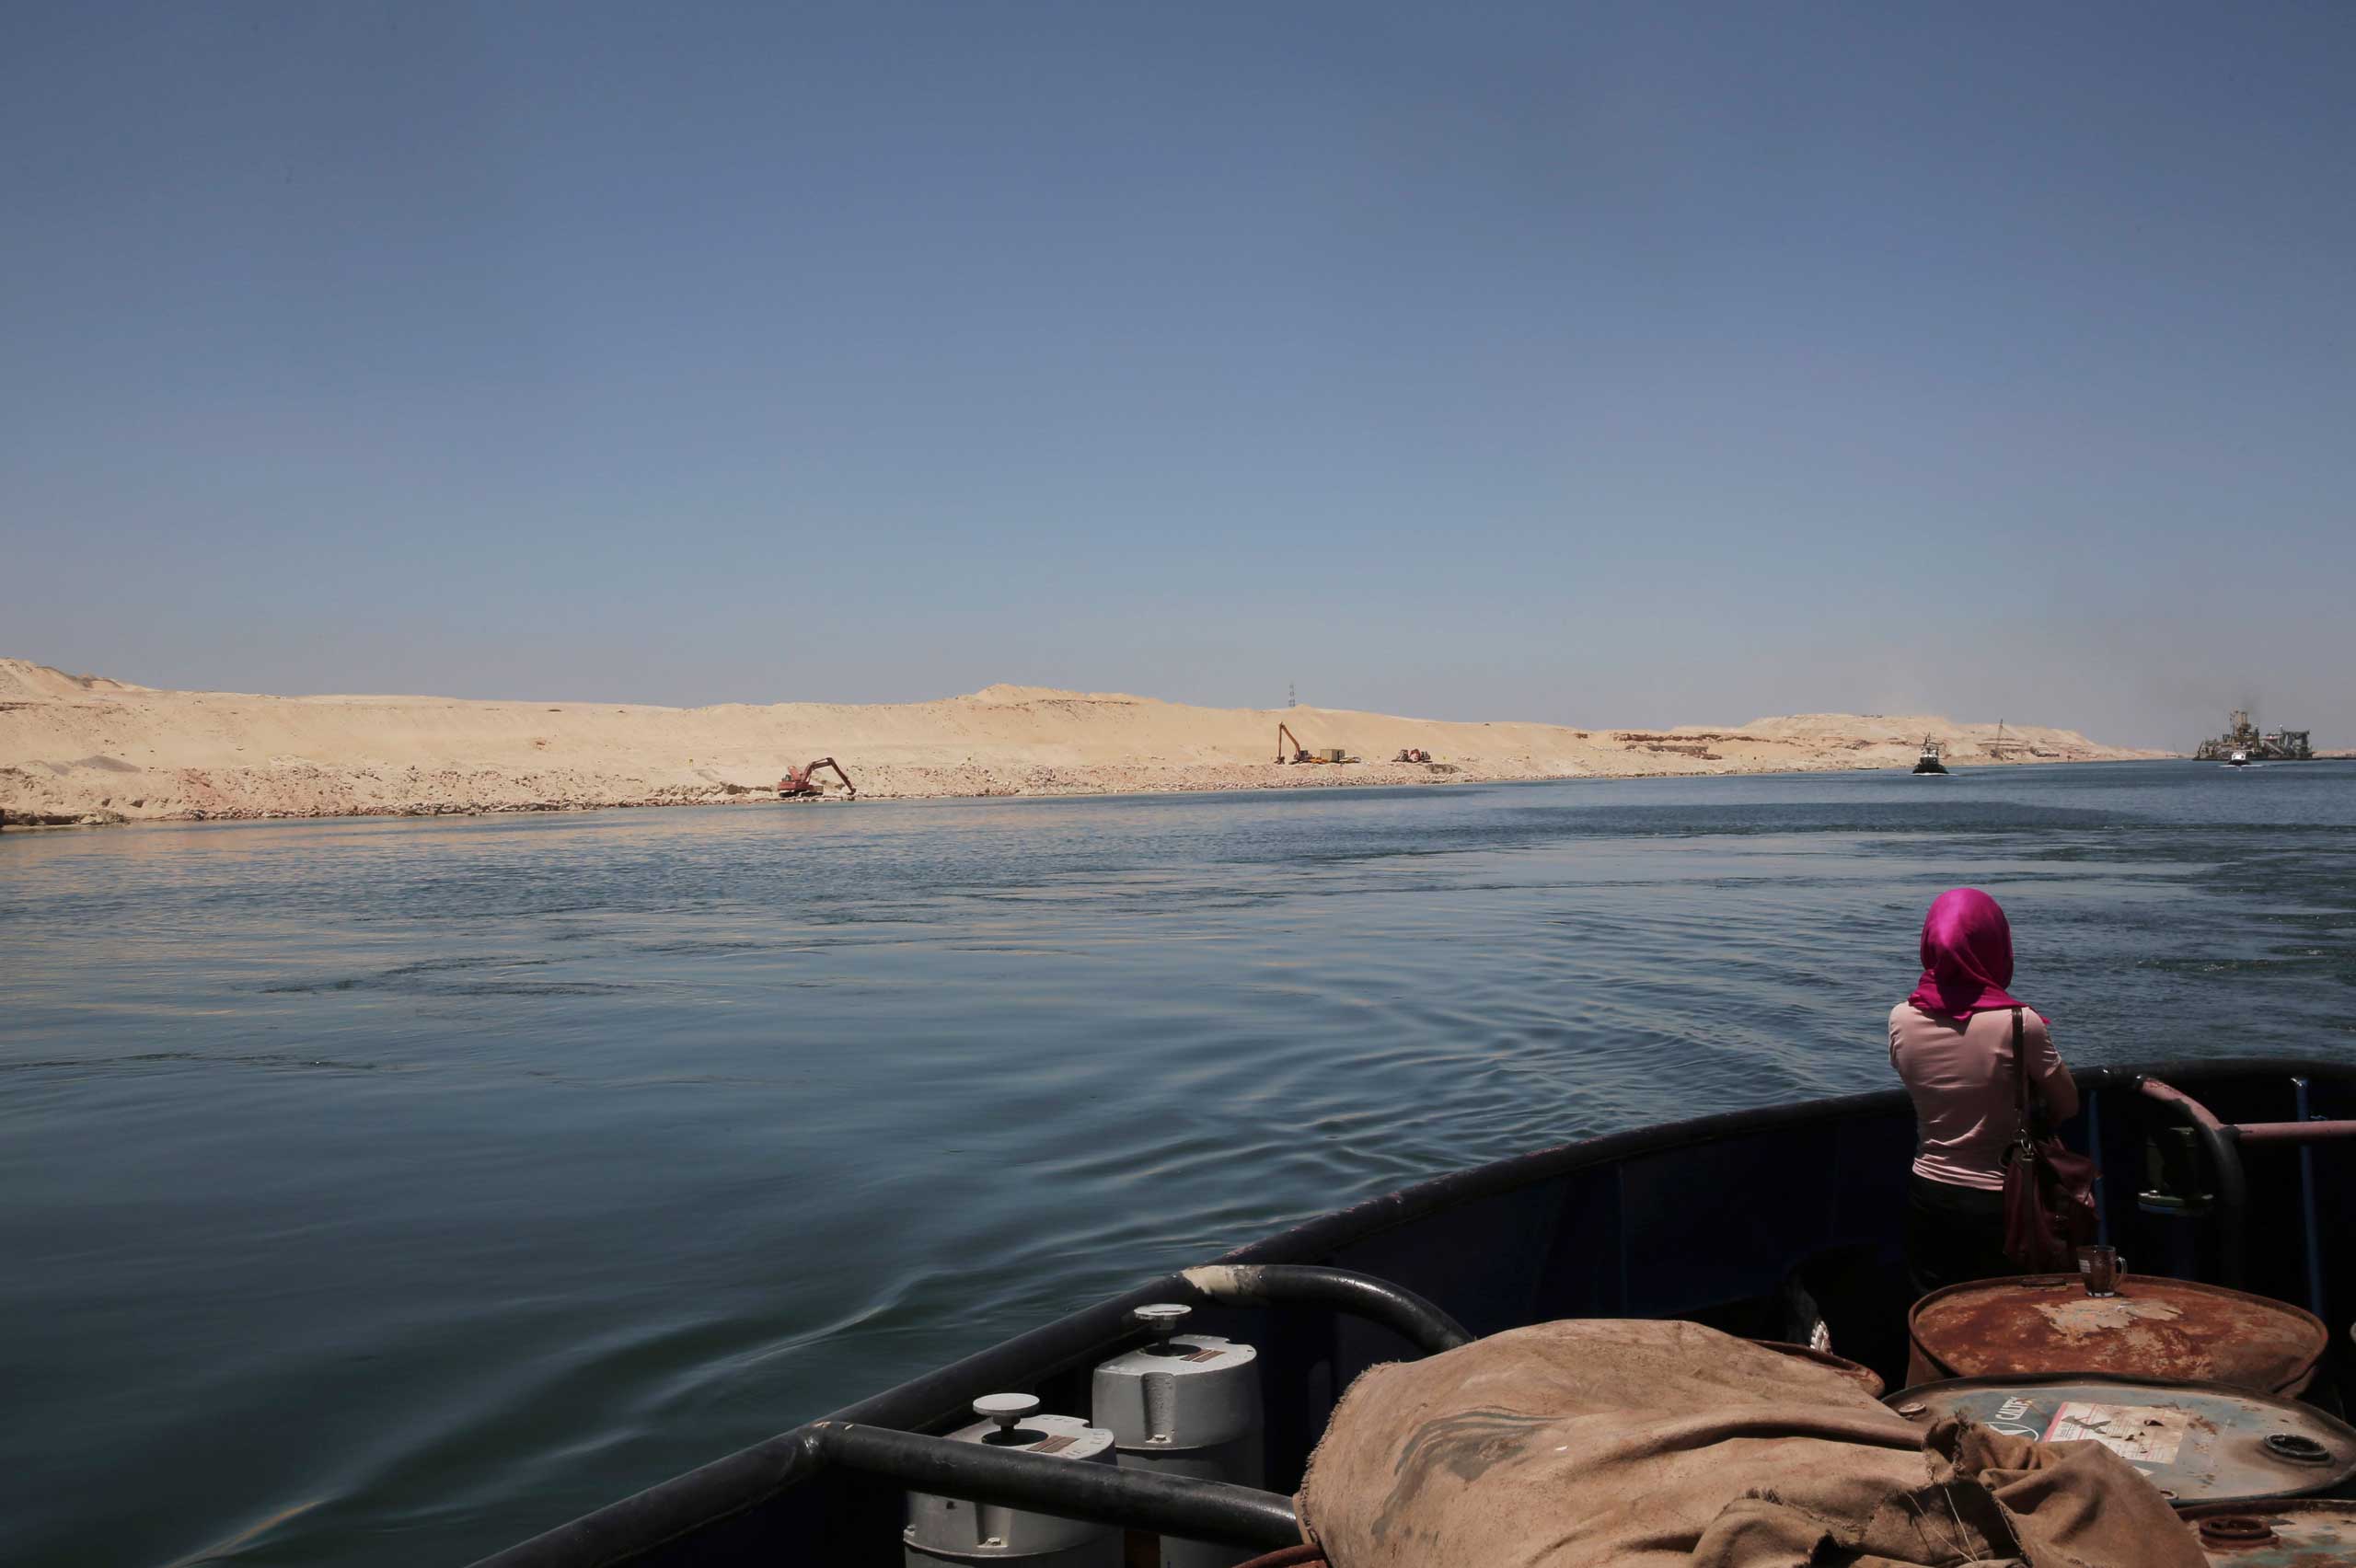 A woman looks at a new section of the Suez Canal during a media tour in Ismailia, Egypt, on July 29, 2015. (Nariman El-Mofty—AP)